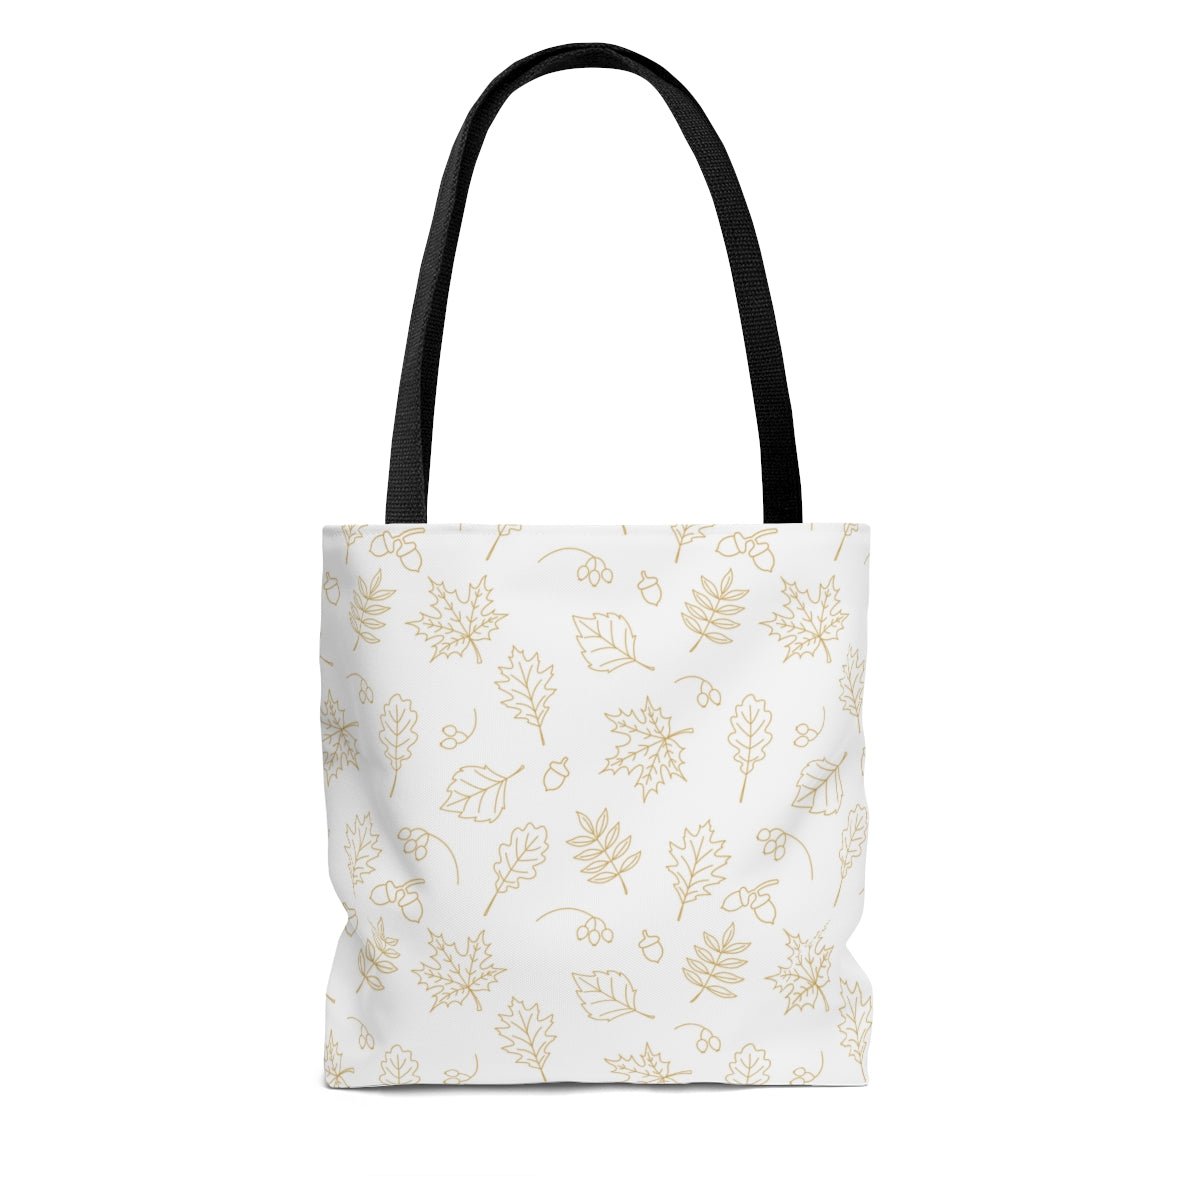 Acorns and Leaves Tote Bag - Puffin Lime